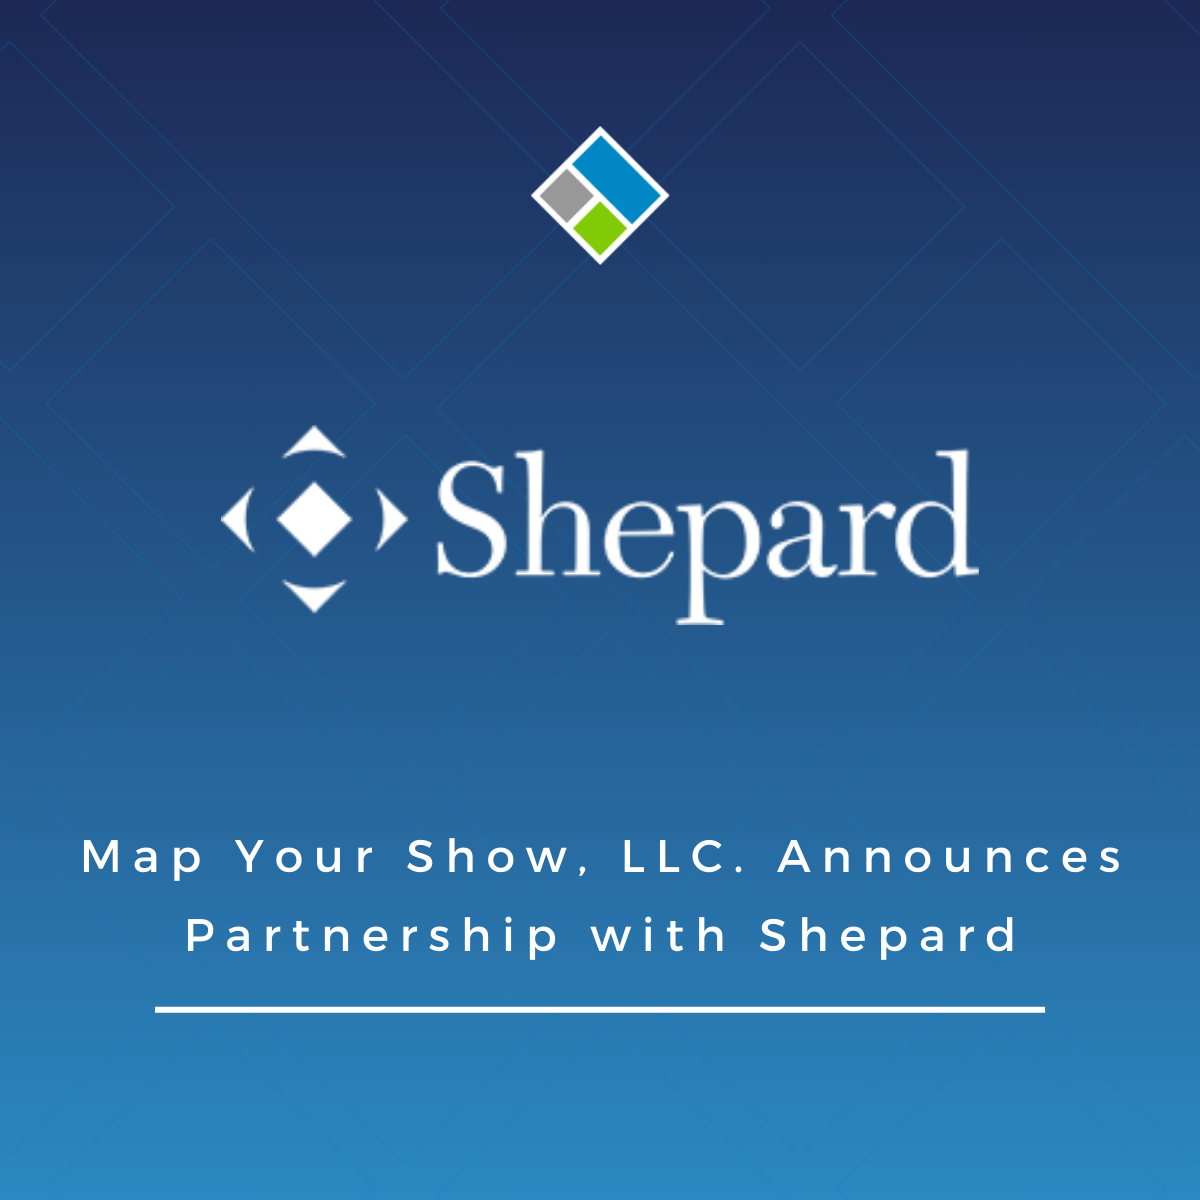 Map Your Show, LLC. Announces Partnership with Shepard